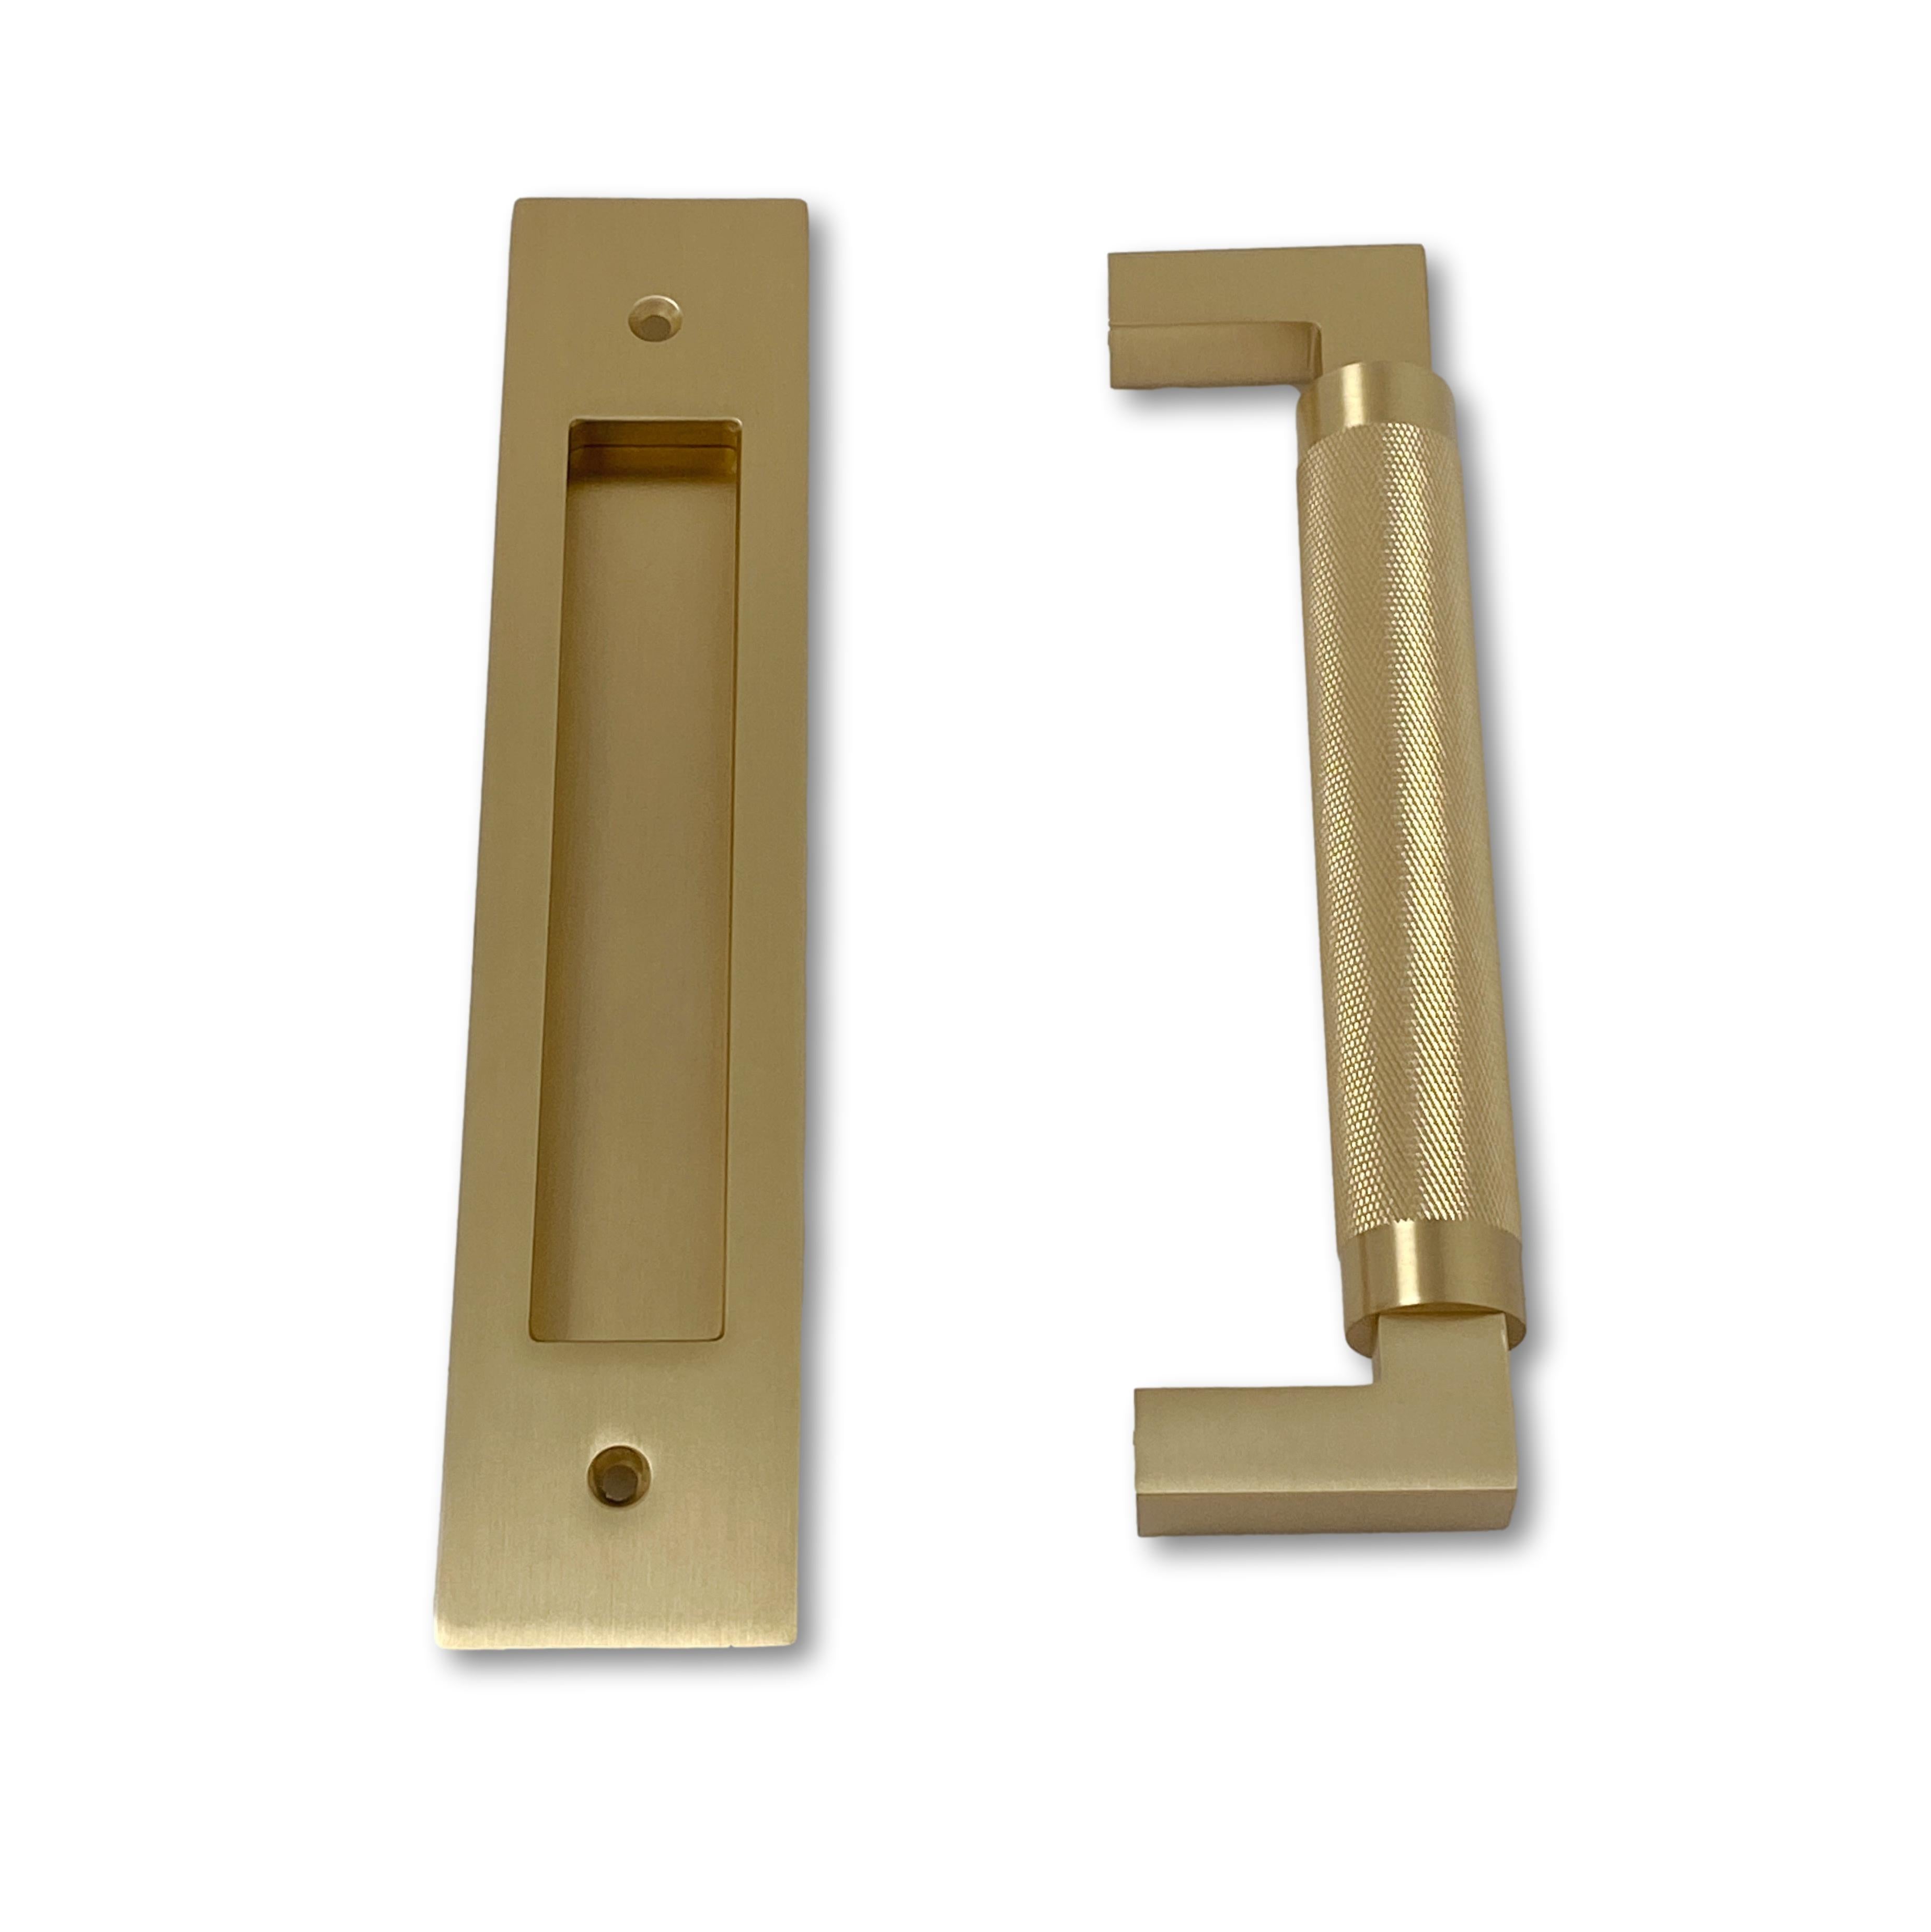 Door Flush Pull and Knurled Handle "Helix" Hardware for Interior Sliding and Barn Doors